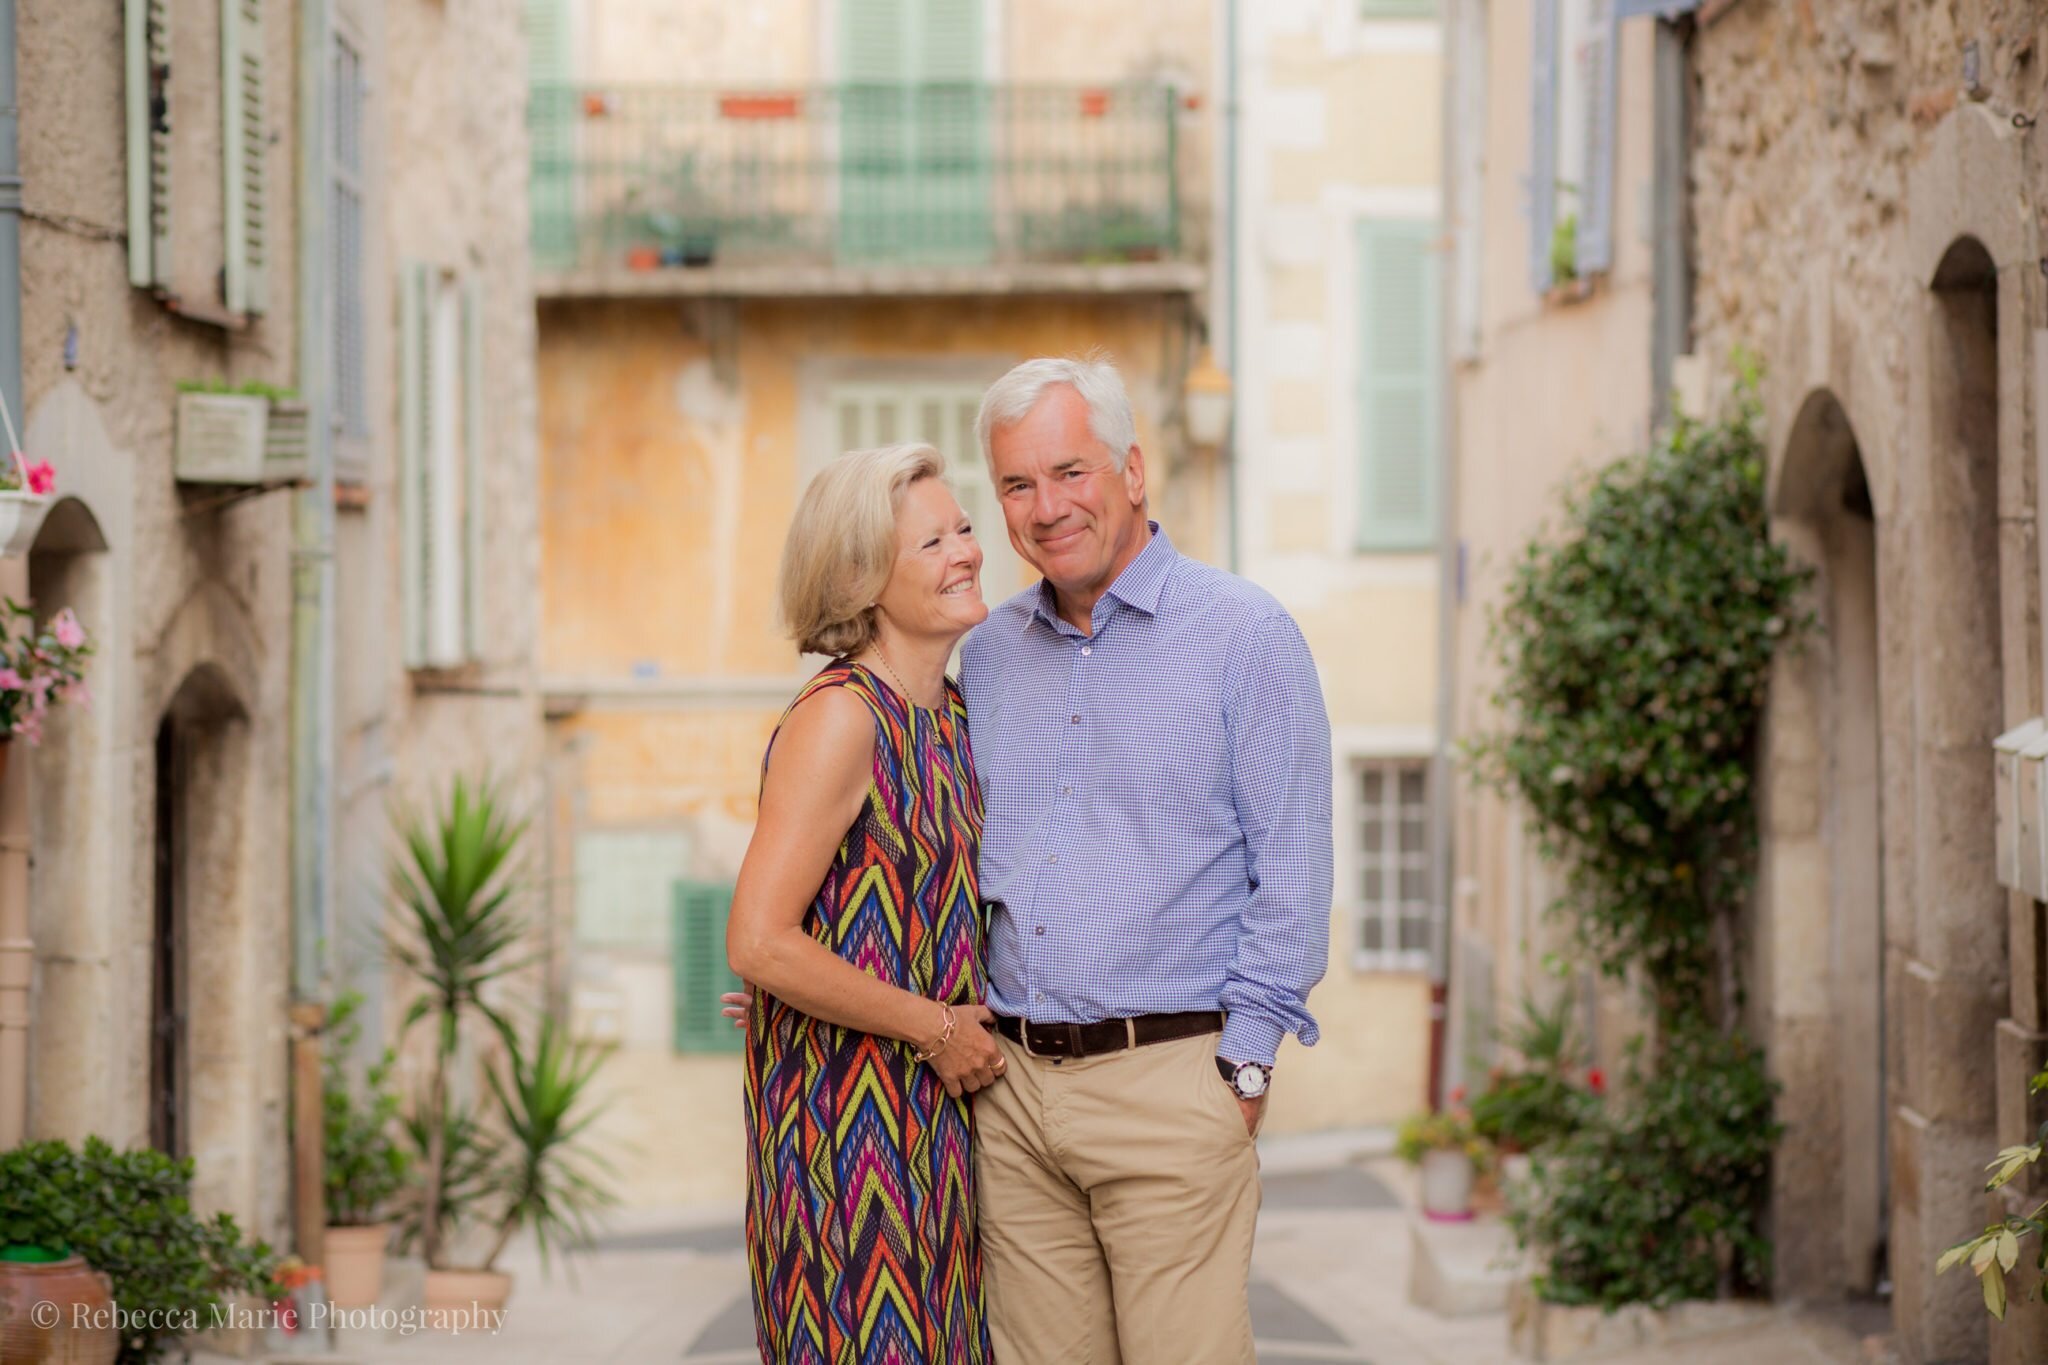 Portraits-in-France-Valbonne-Rebecca-Marie-Photography-7-1